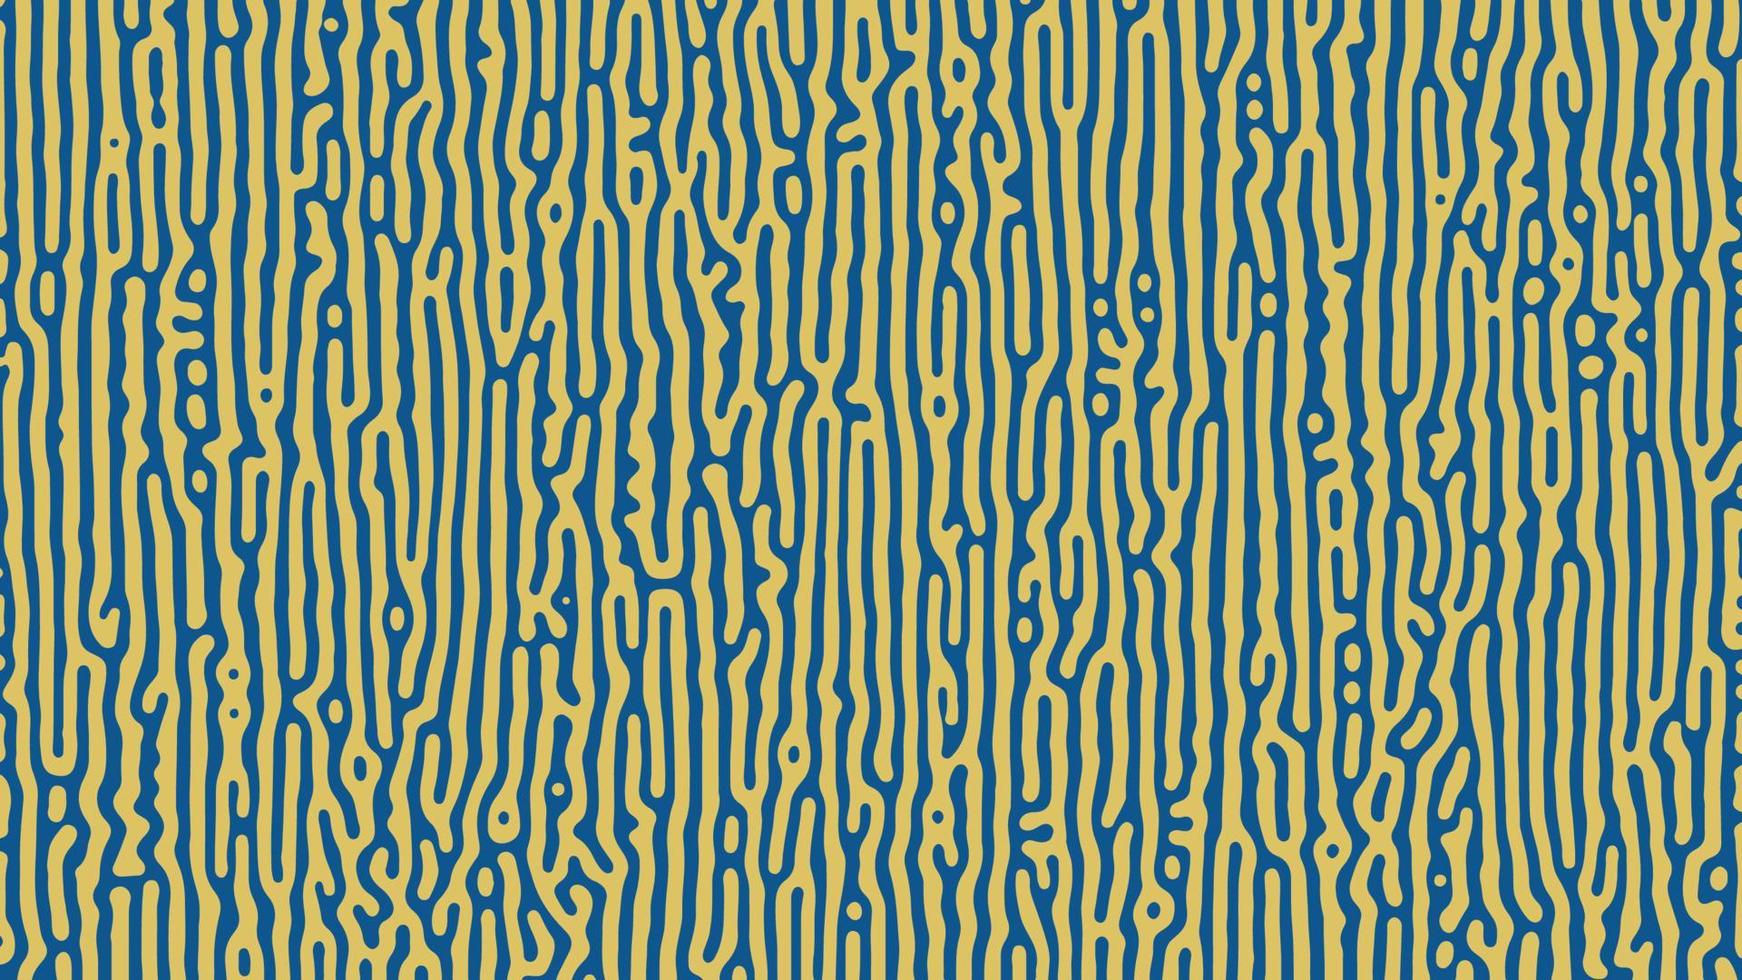 Yellow and blue Turing reaction background. Abstract diffusion pattern with chaotic shapes. Vector illustration.